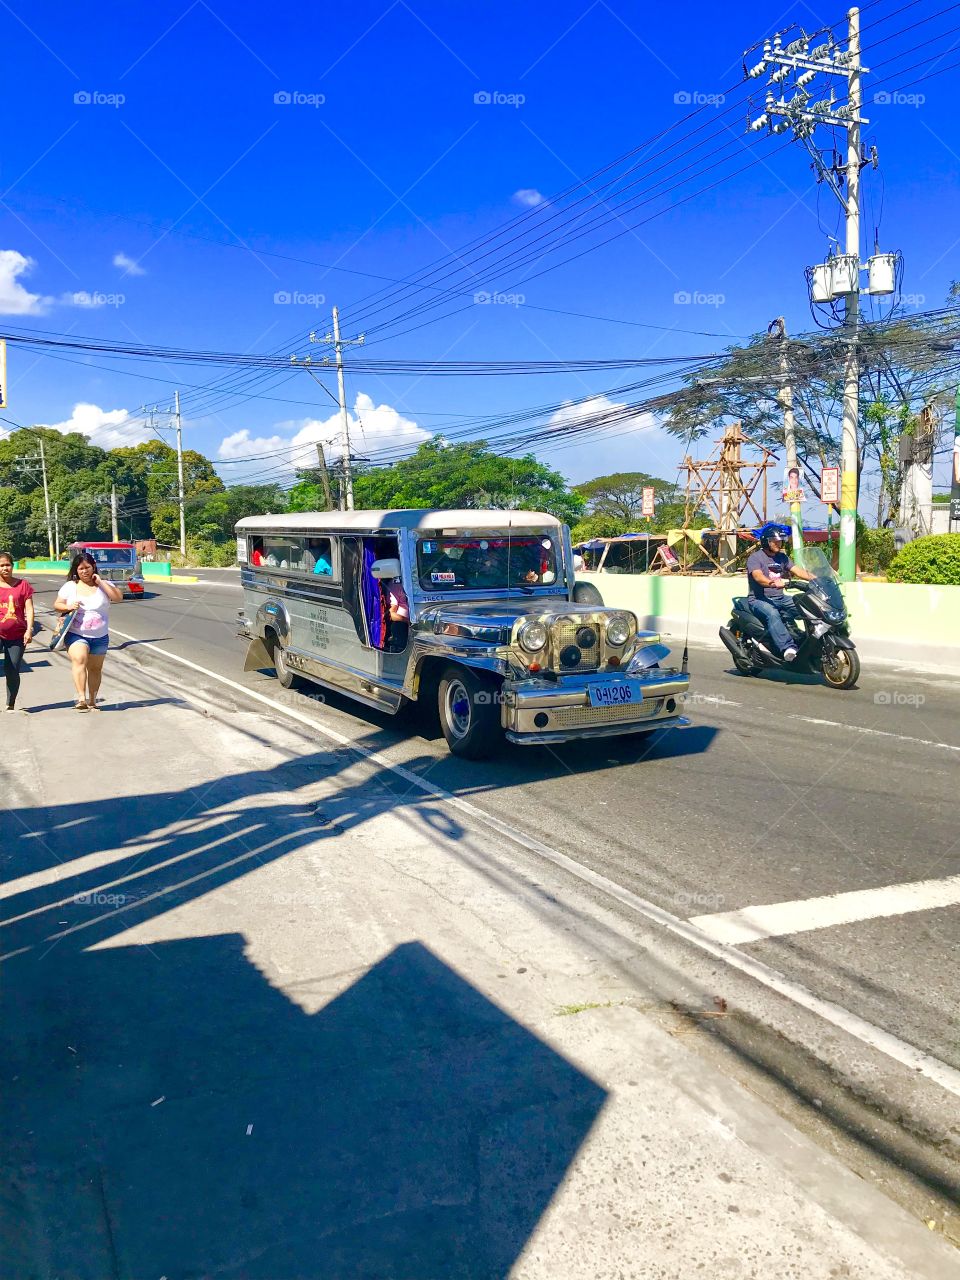 Only in the Philippines. The long version of Jeep's Grand Cherokee, the "Jeepney" as they call it. Can take up to 15 people depending on the length. Easy, convenient ride and cheaper in style.